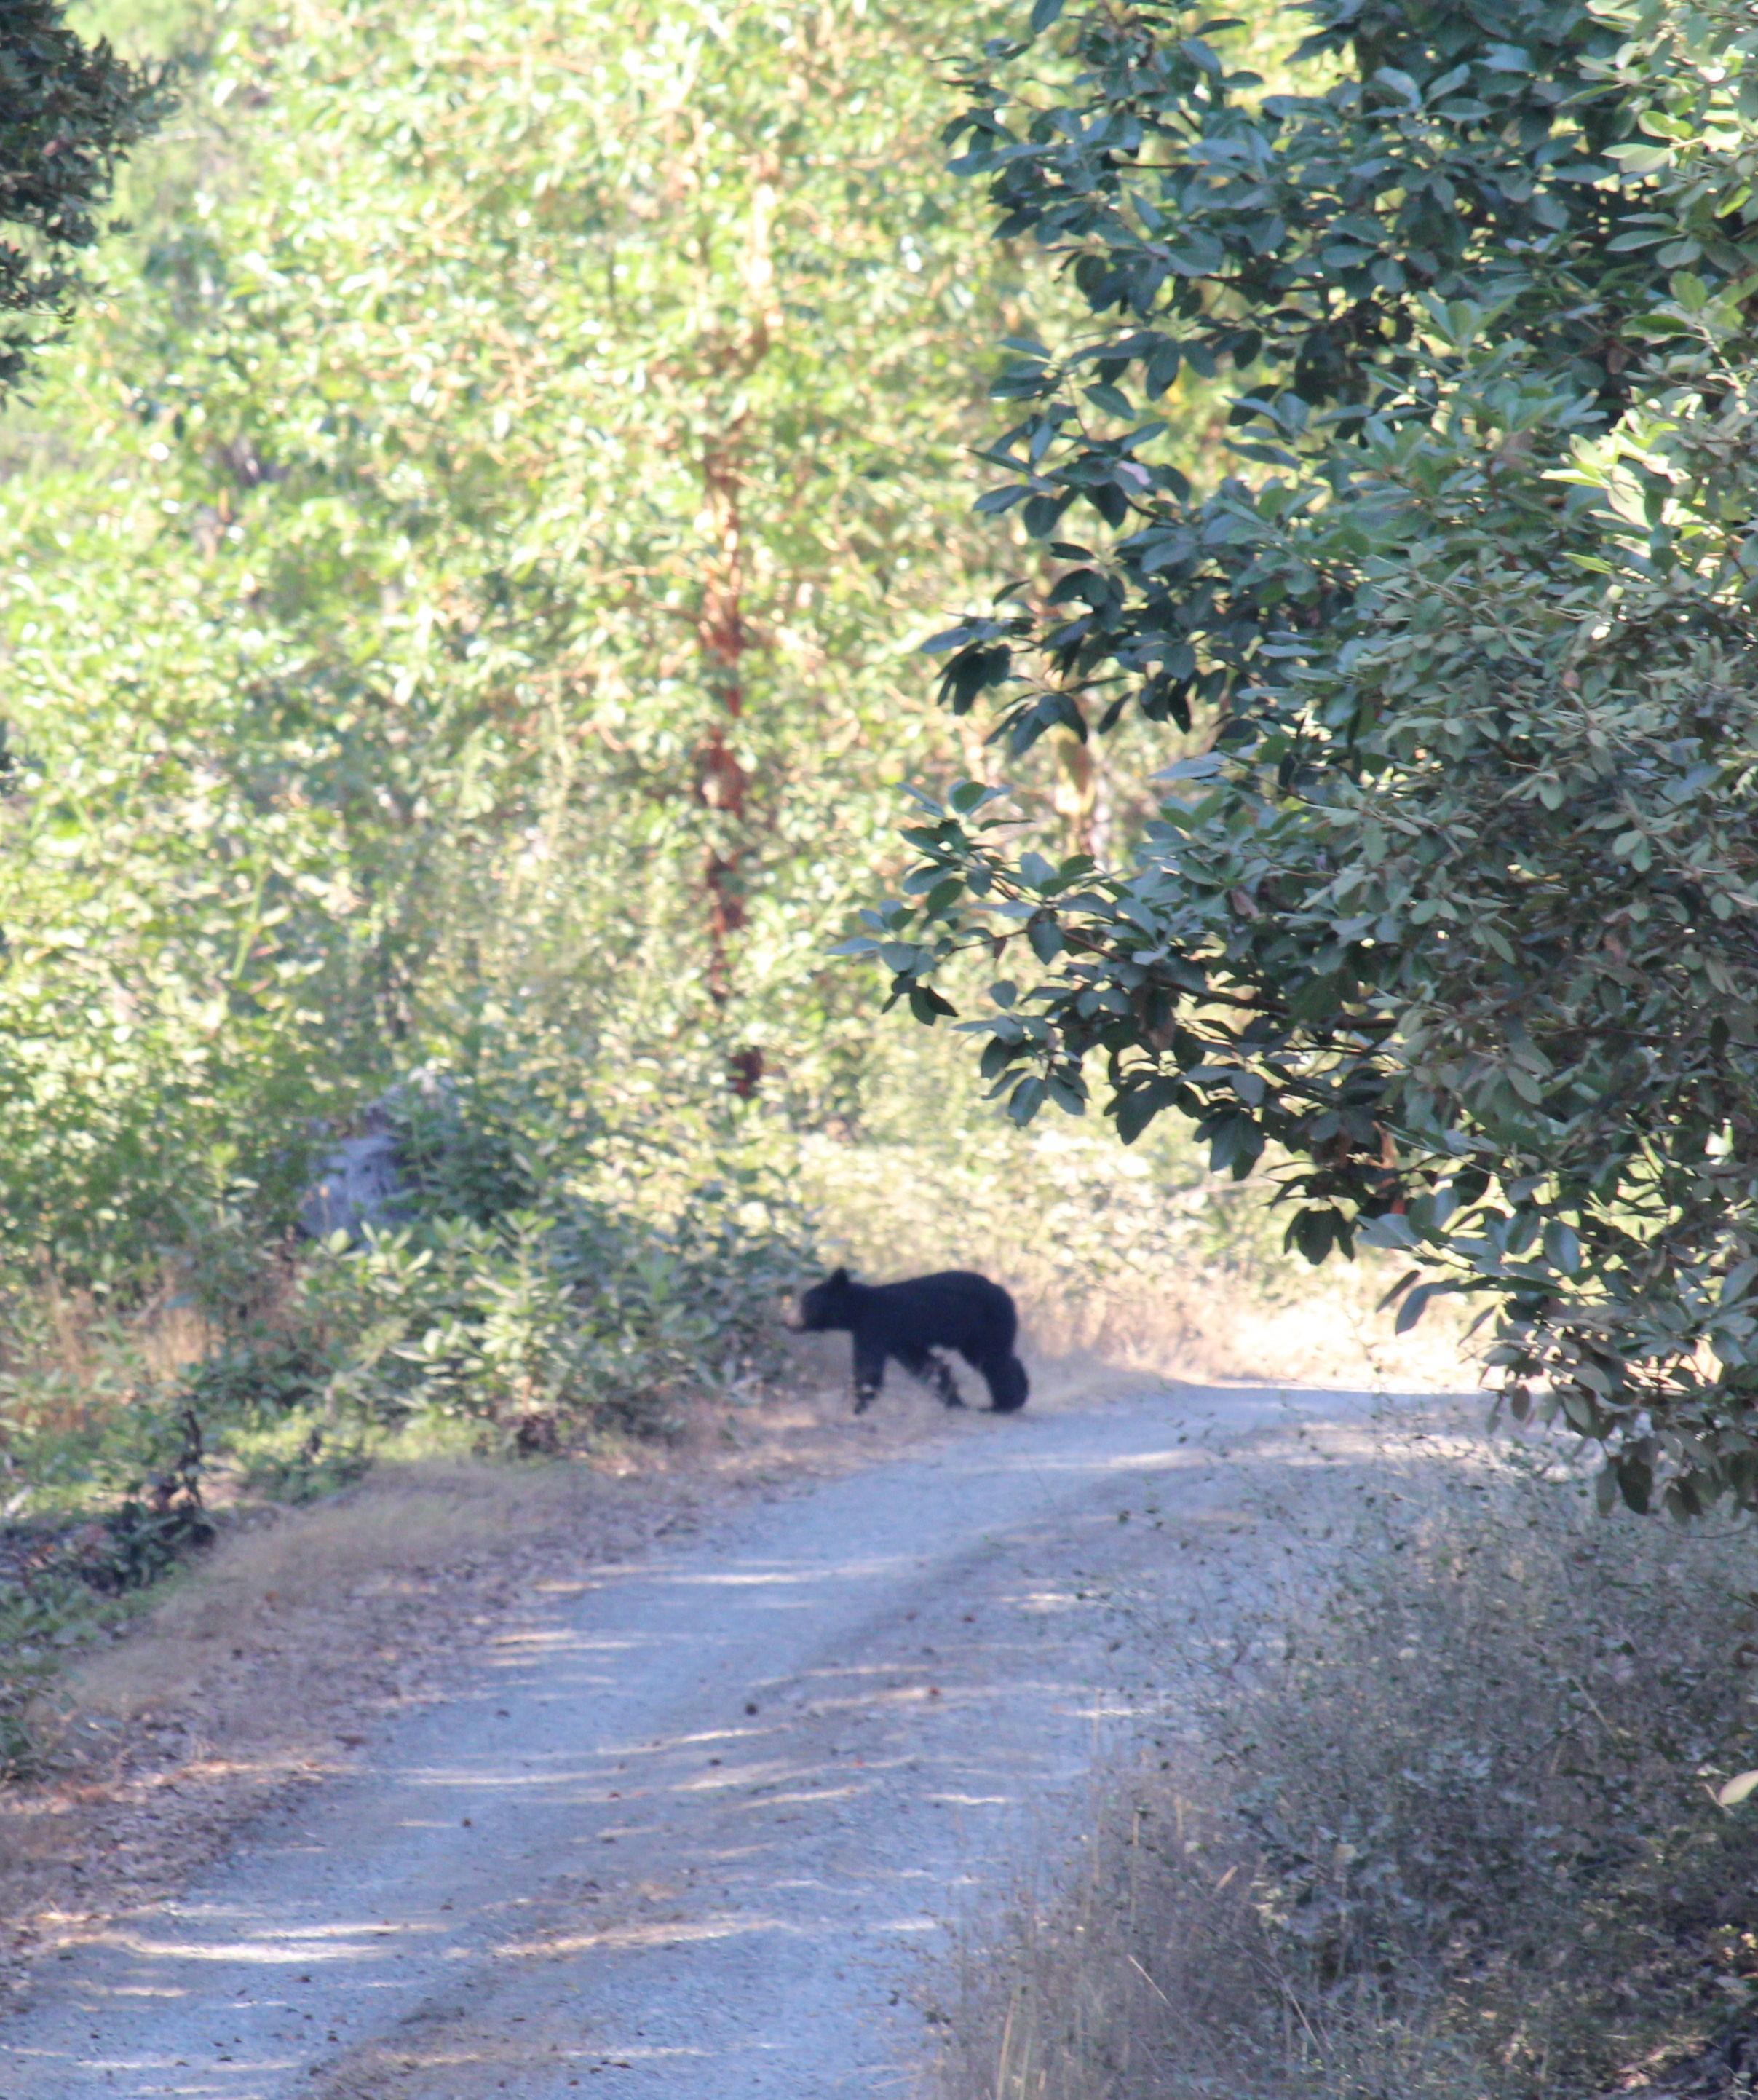 A young black bear walks across a dirt road in a forest